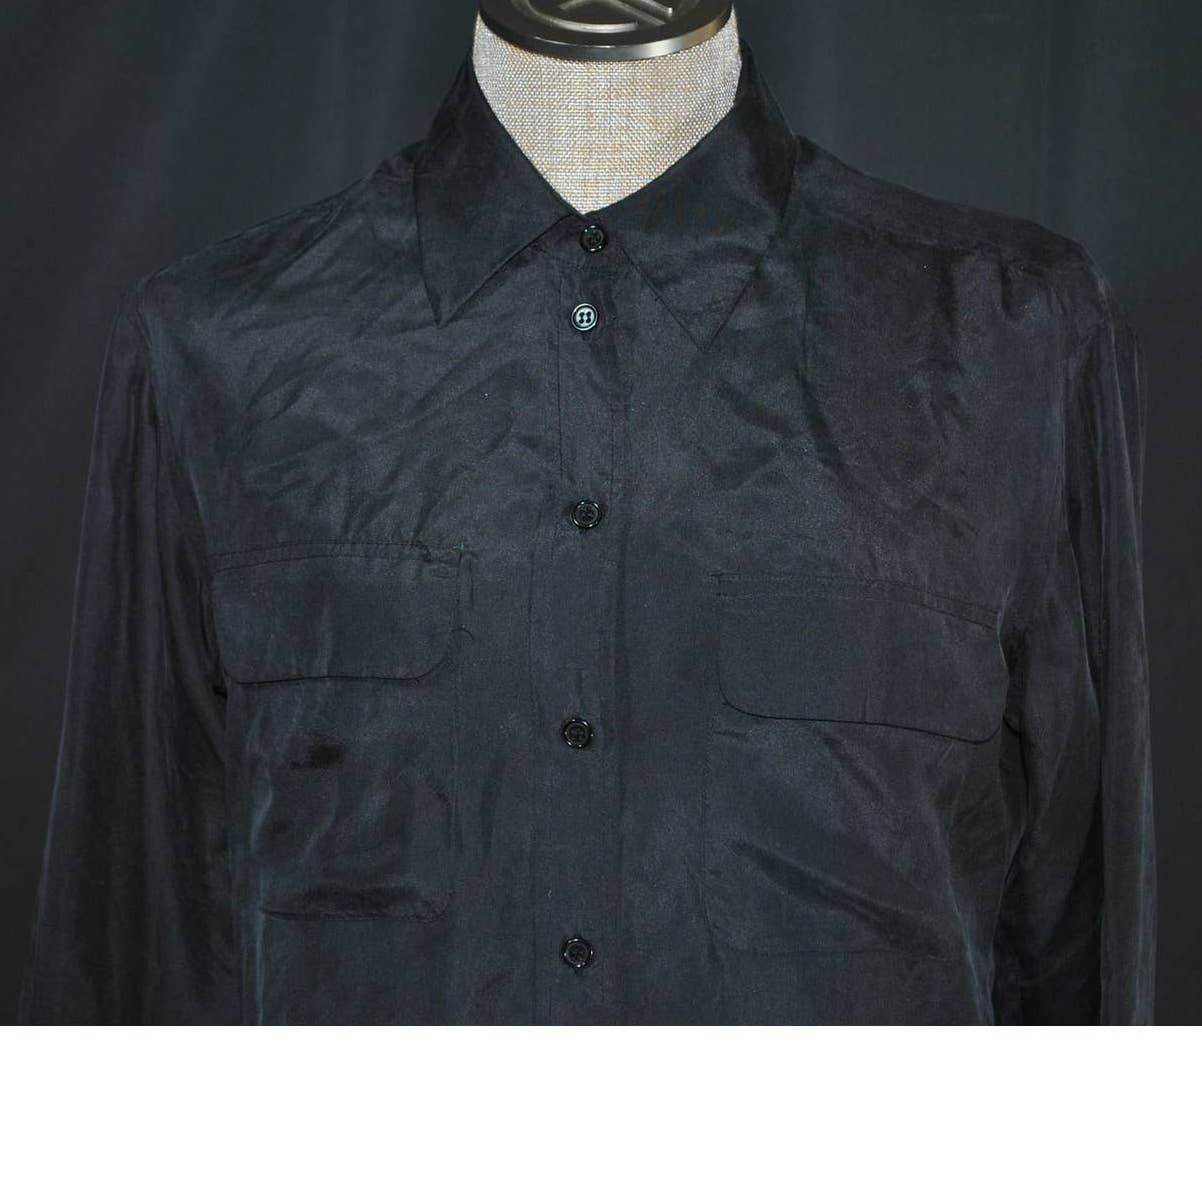 Vintage Barneys New York Black Washed Silk Button Up Top - XS